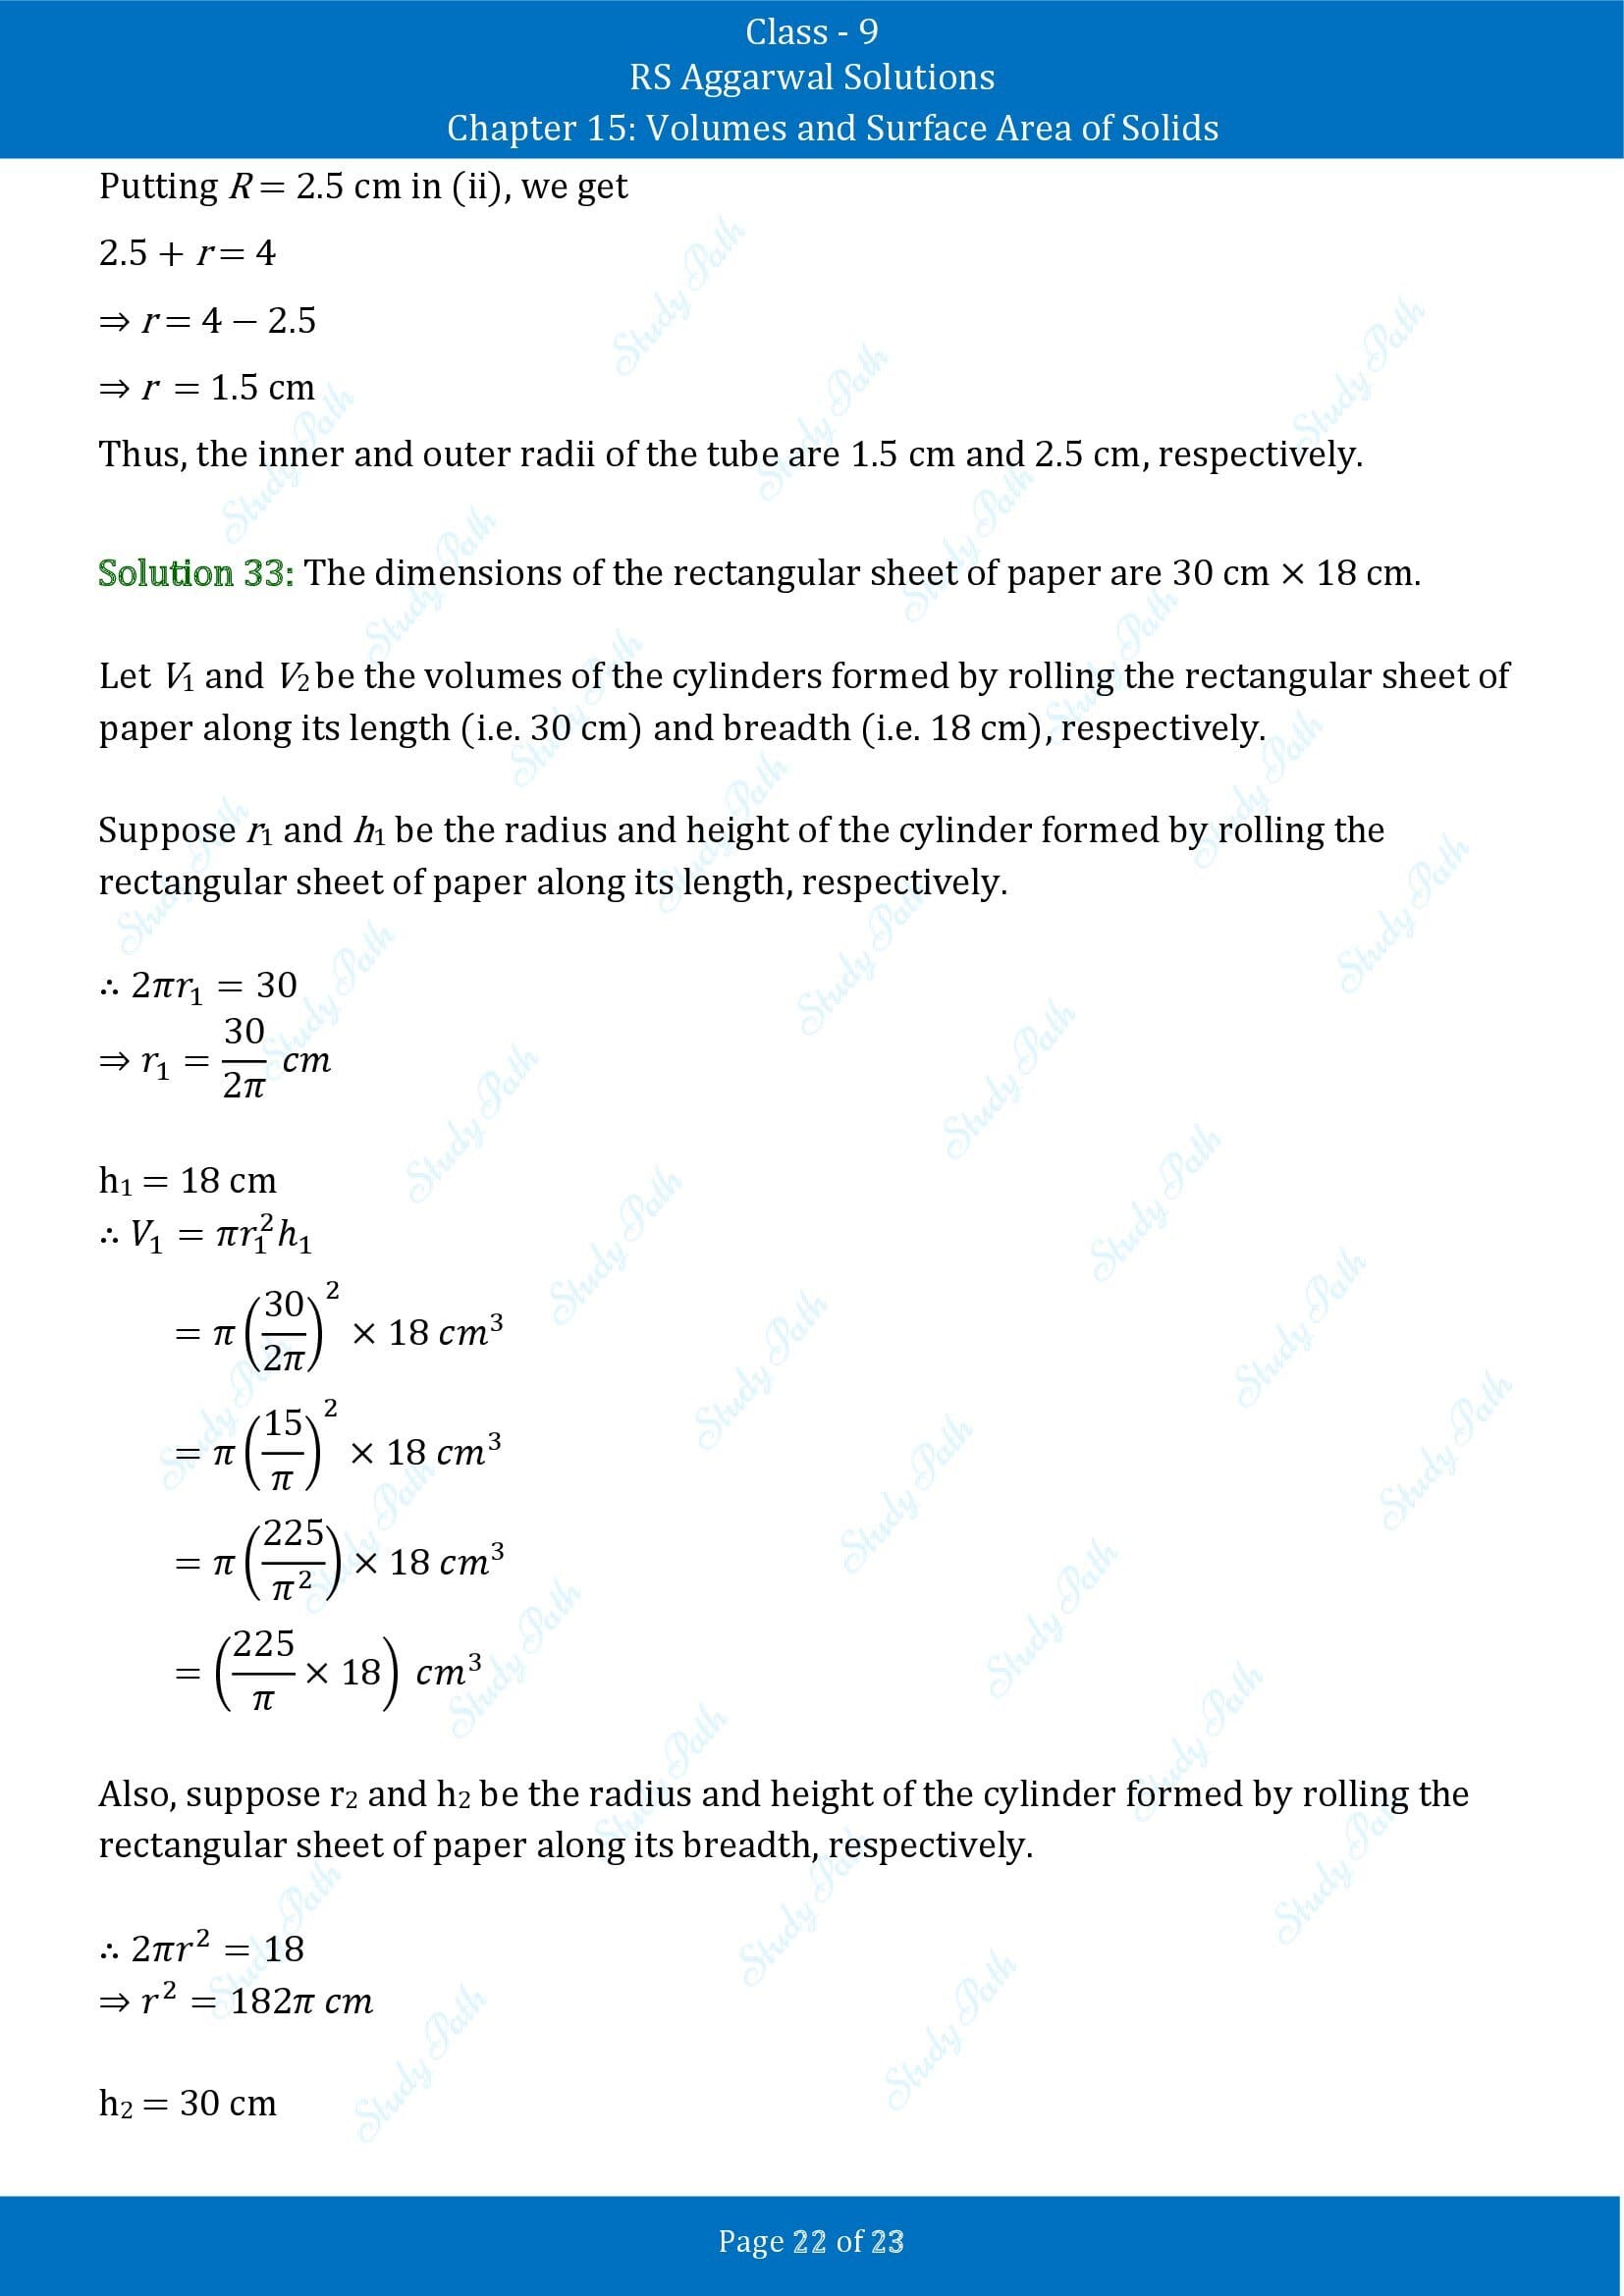 RS Aggarwal Solutions Class 9 Chapter 15 Volumes and Surface Area of Solids Exercise 15B 00022